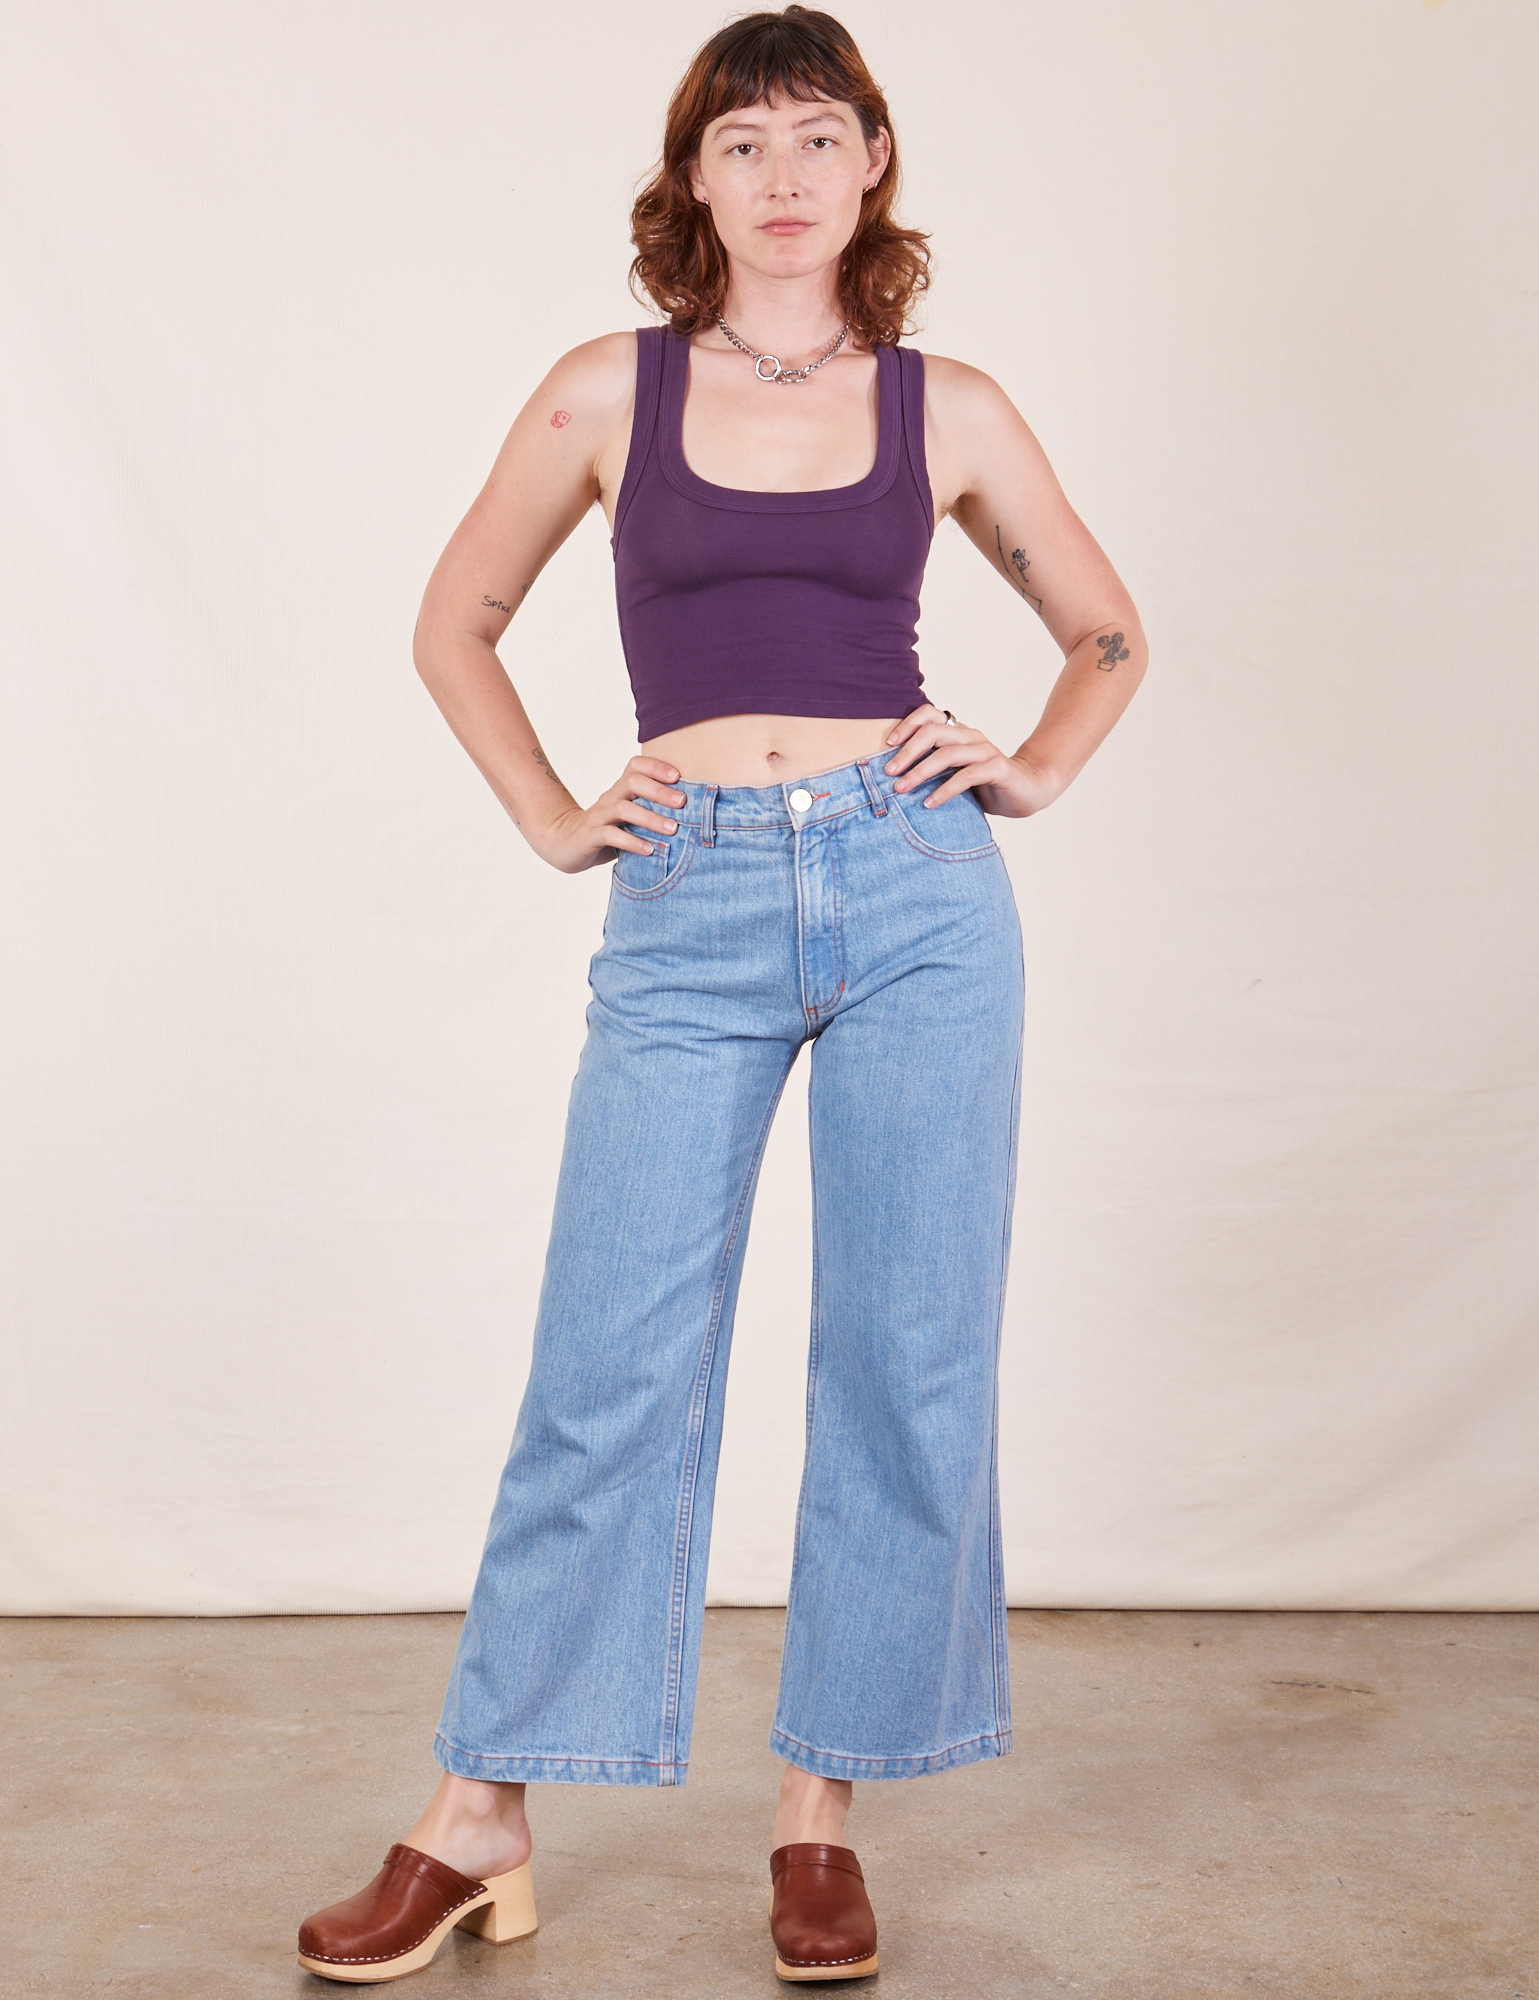 Alex is wearing Cropped Tank Top in Nebula Purple and light wash Sailor Jeans